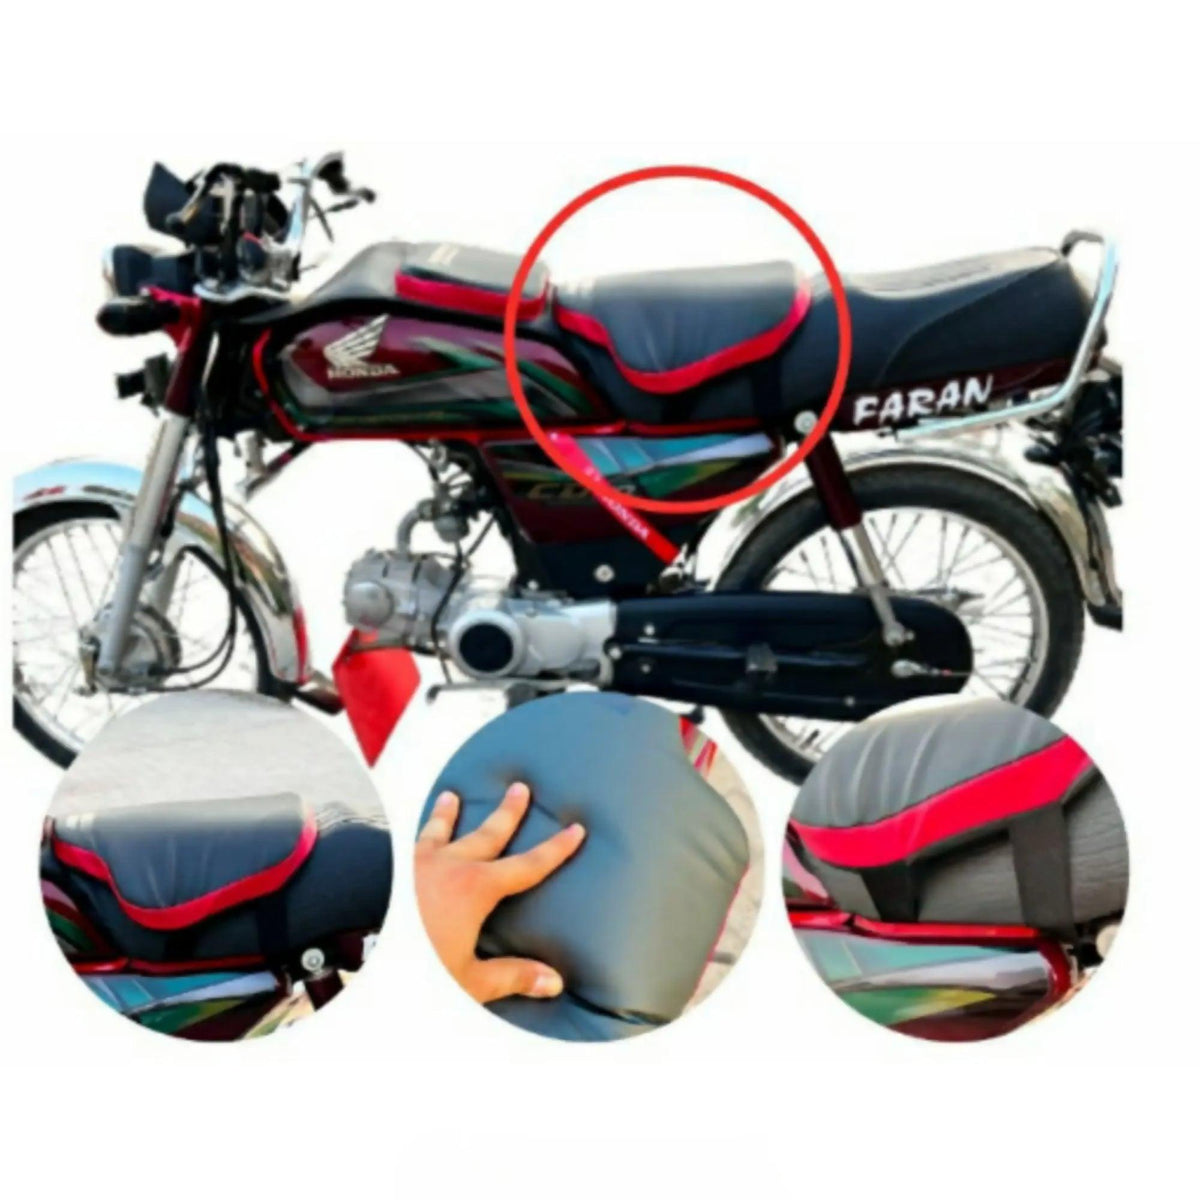 badgeRed And Black Waterproof Universal Tainki Bike Seat Cushion For Kids with Tainki Cover - GIFT City - ValueBox